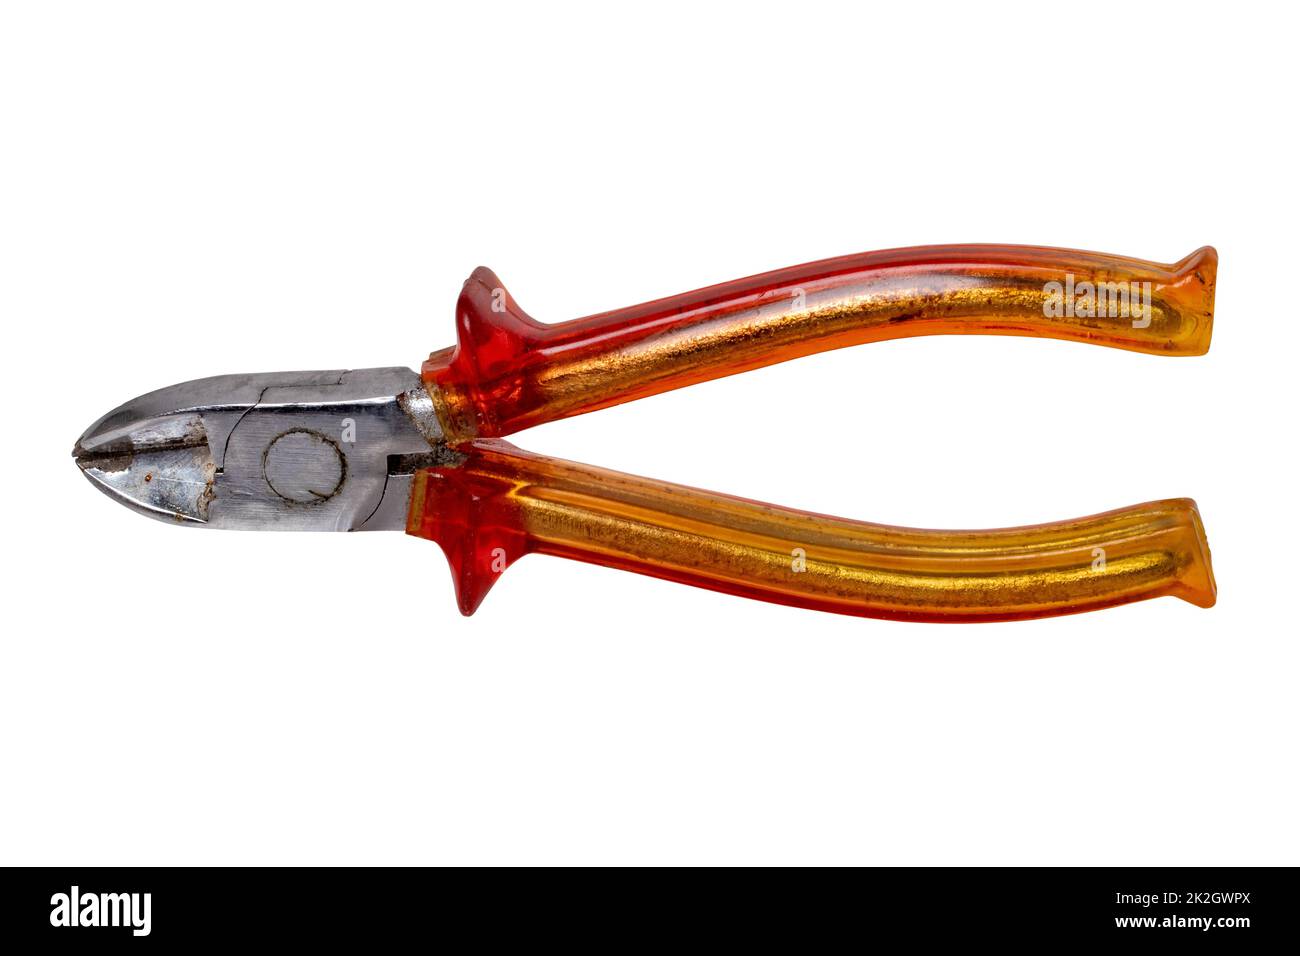 Closeup of an old rusty pair of cutting pliers or side cutters for cutting wire with red plastic handles isolated on white background. Clipping path. Electrician's tool. Stock Photo